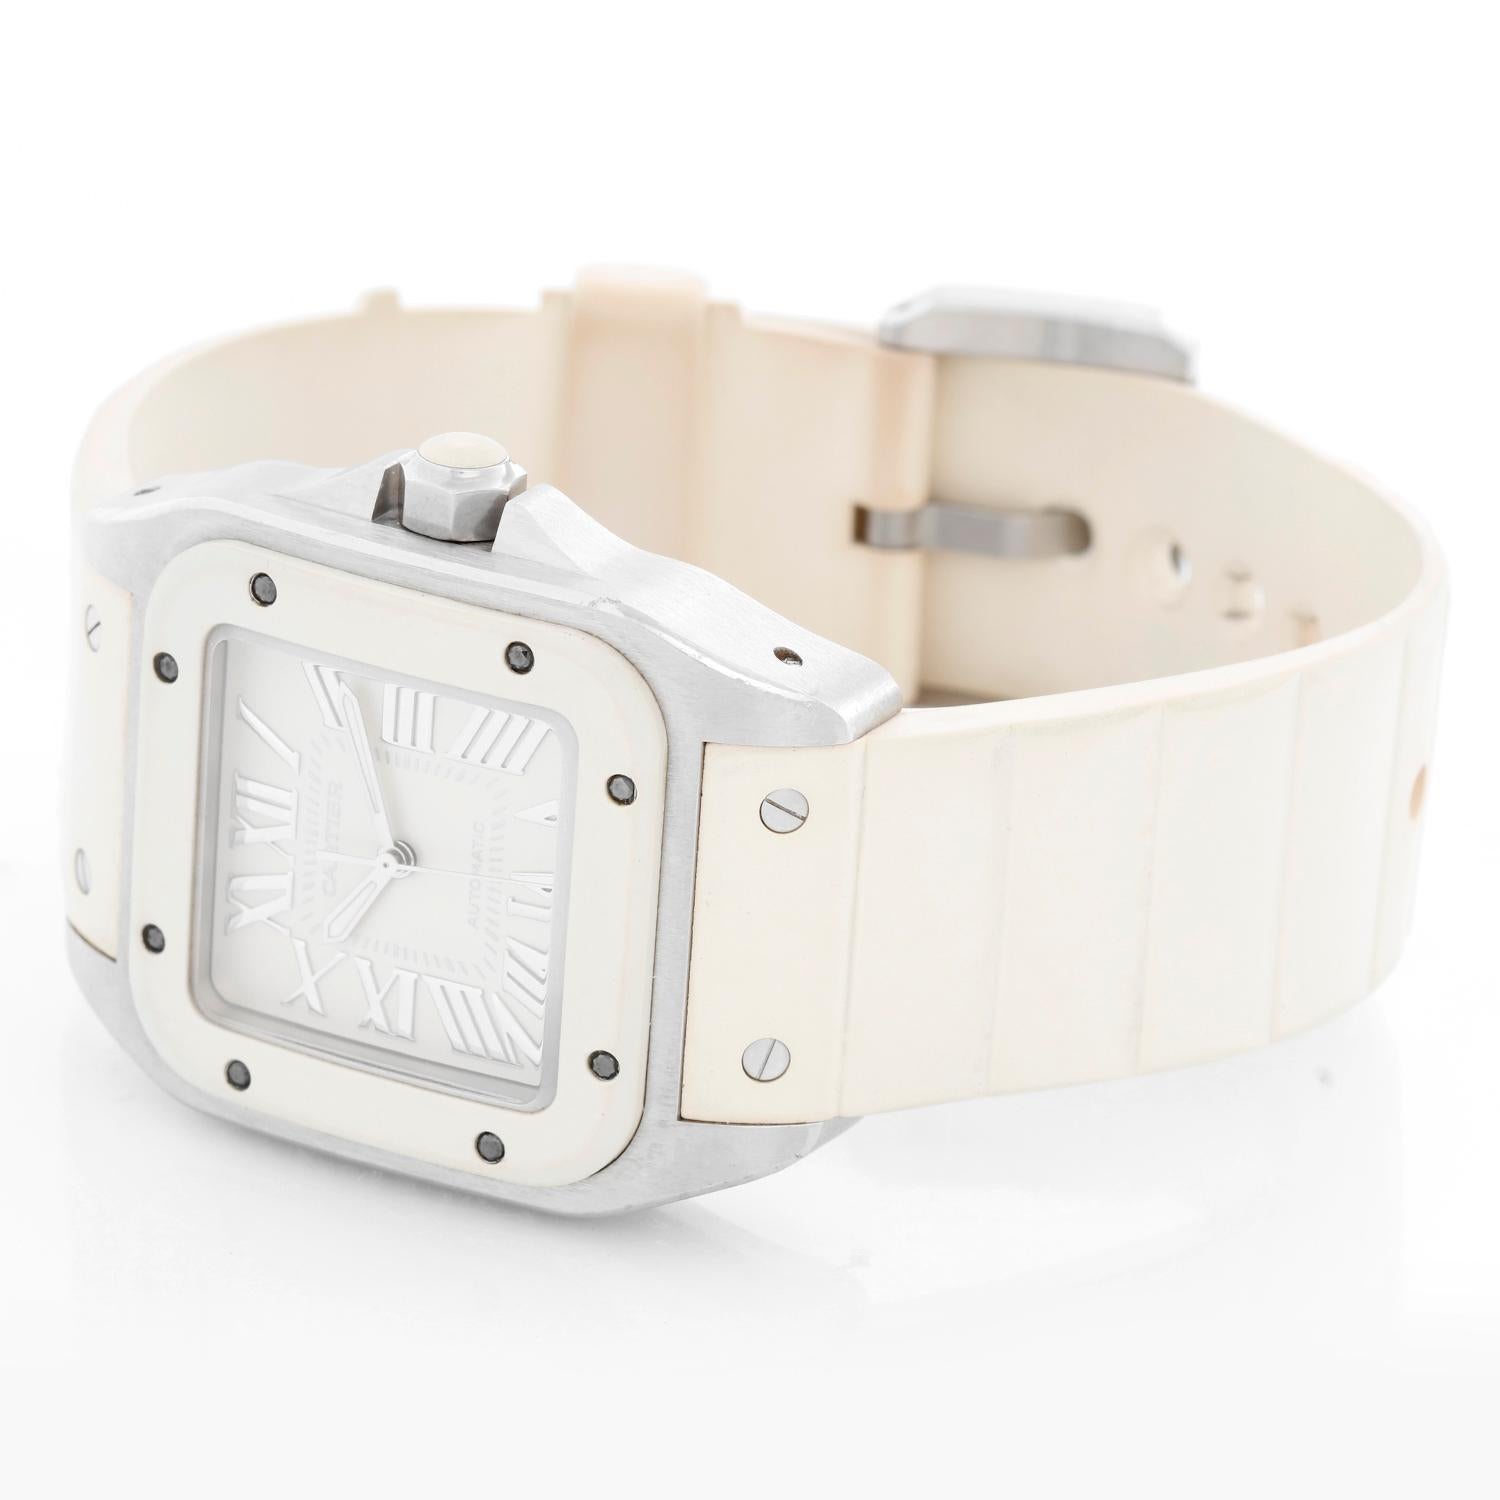 Cartier Santos 100 White Rubber & Steel Automatic  Unisex Watch W20122U2 - Automatic winding. Stainless steel case with white rubber bezel and crown (33mm x 43mm). White dial with Roman numerals. White rubber strap band with stainless steel Cartier